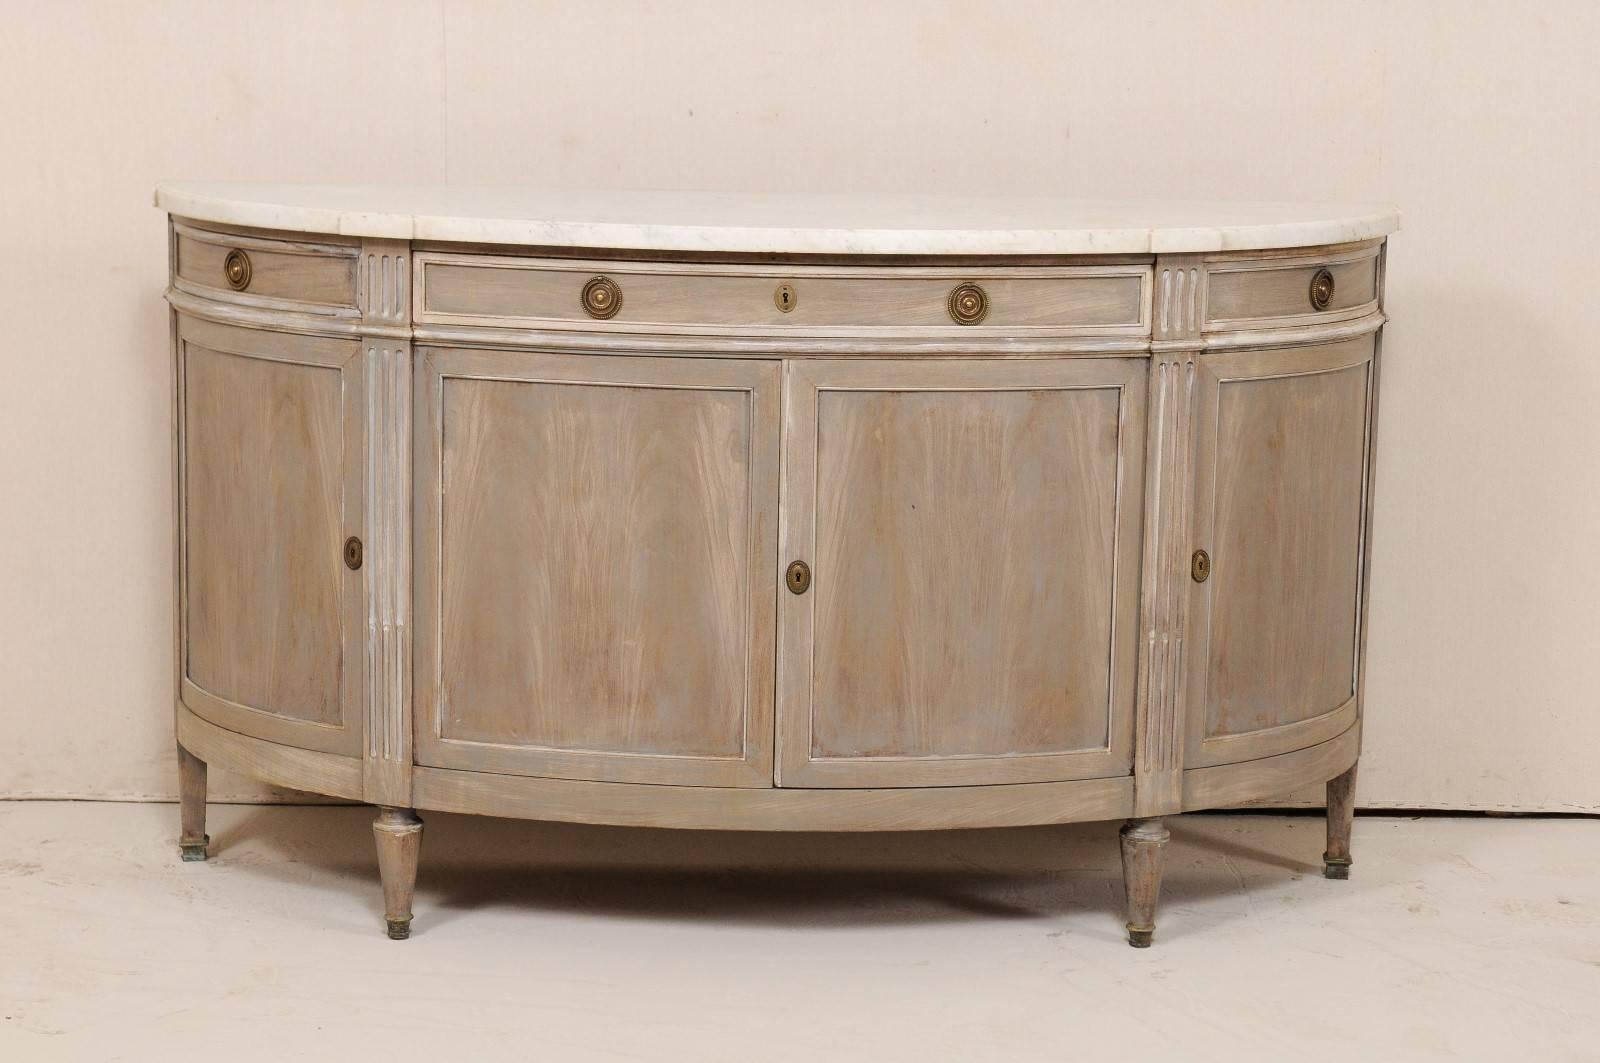 An French marble-top demilune cabinet from the early 20th century. This antique French cabinet features an elegantly curved demilune body, with fluted details down each of the four side posts, topped with white marble and raised on pegged feet.